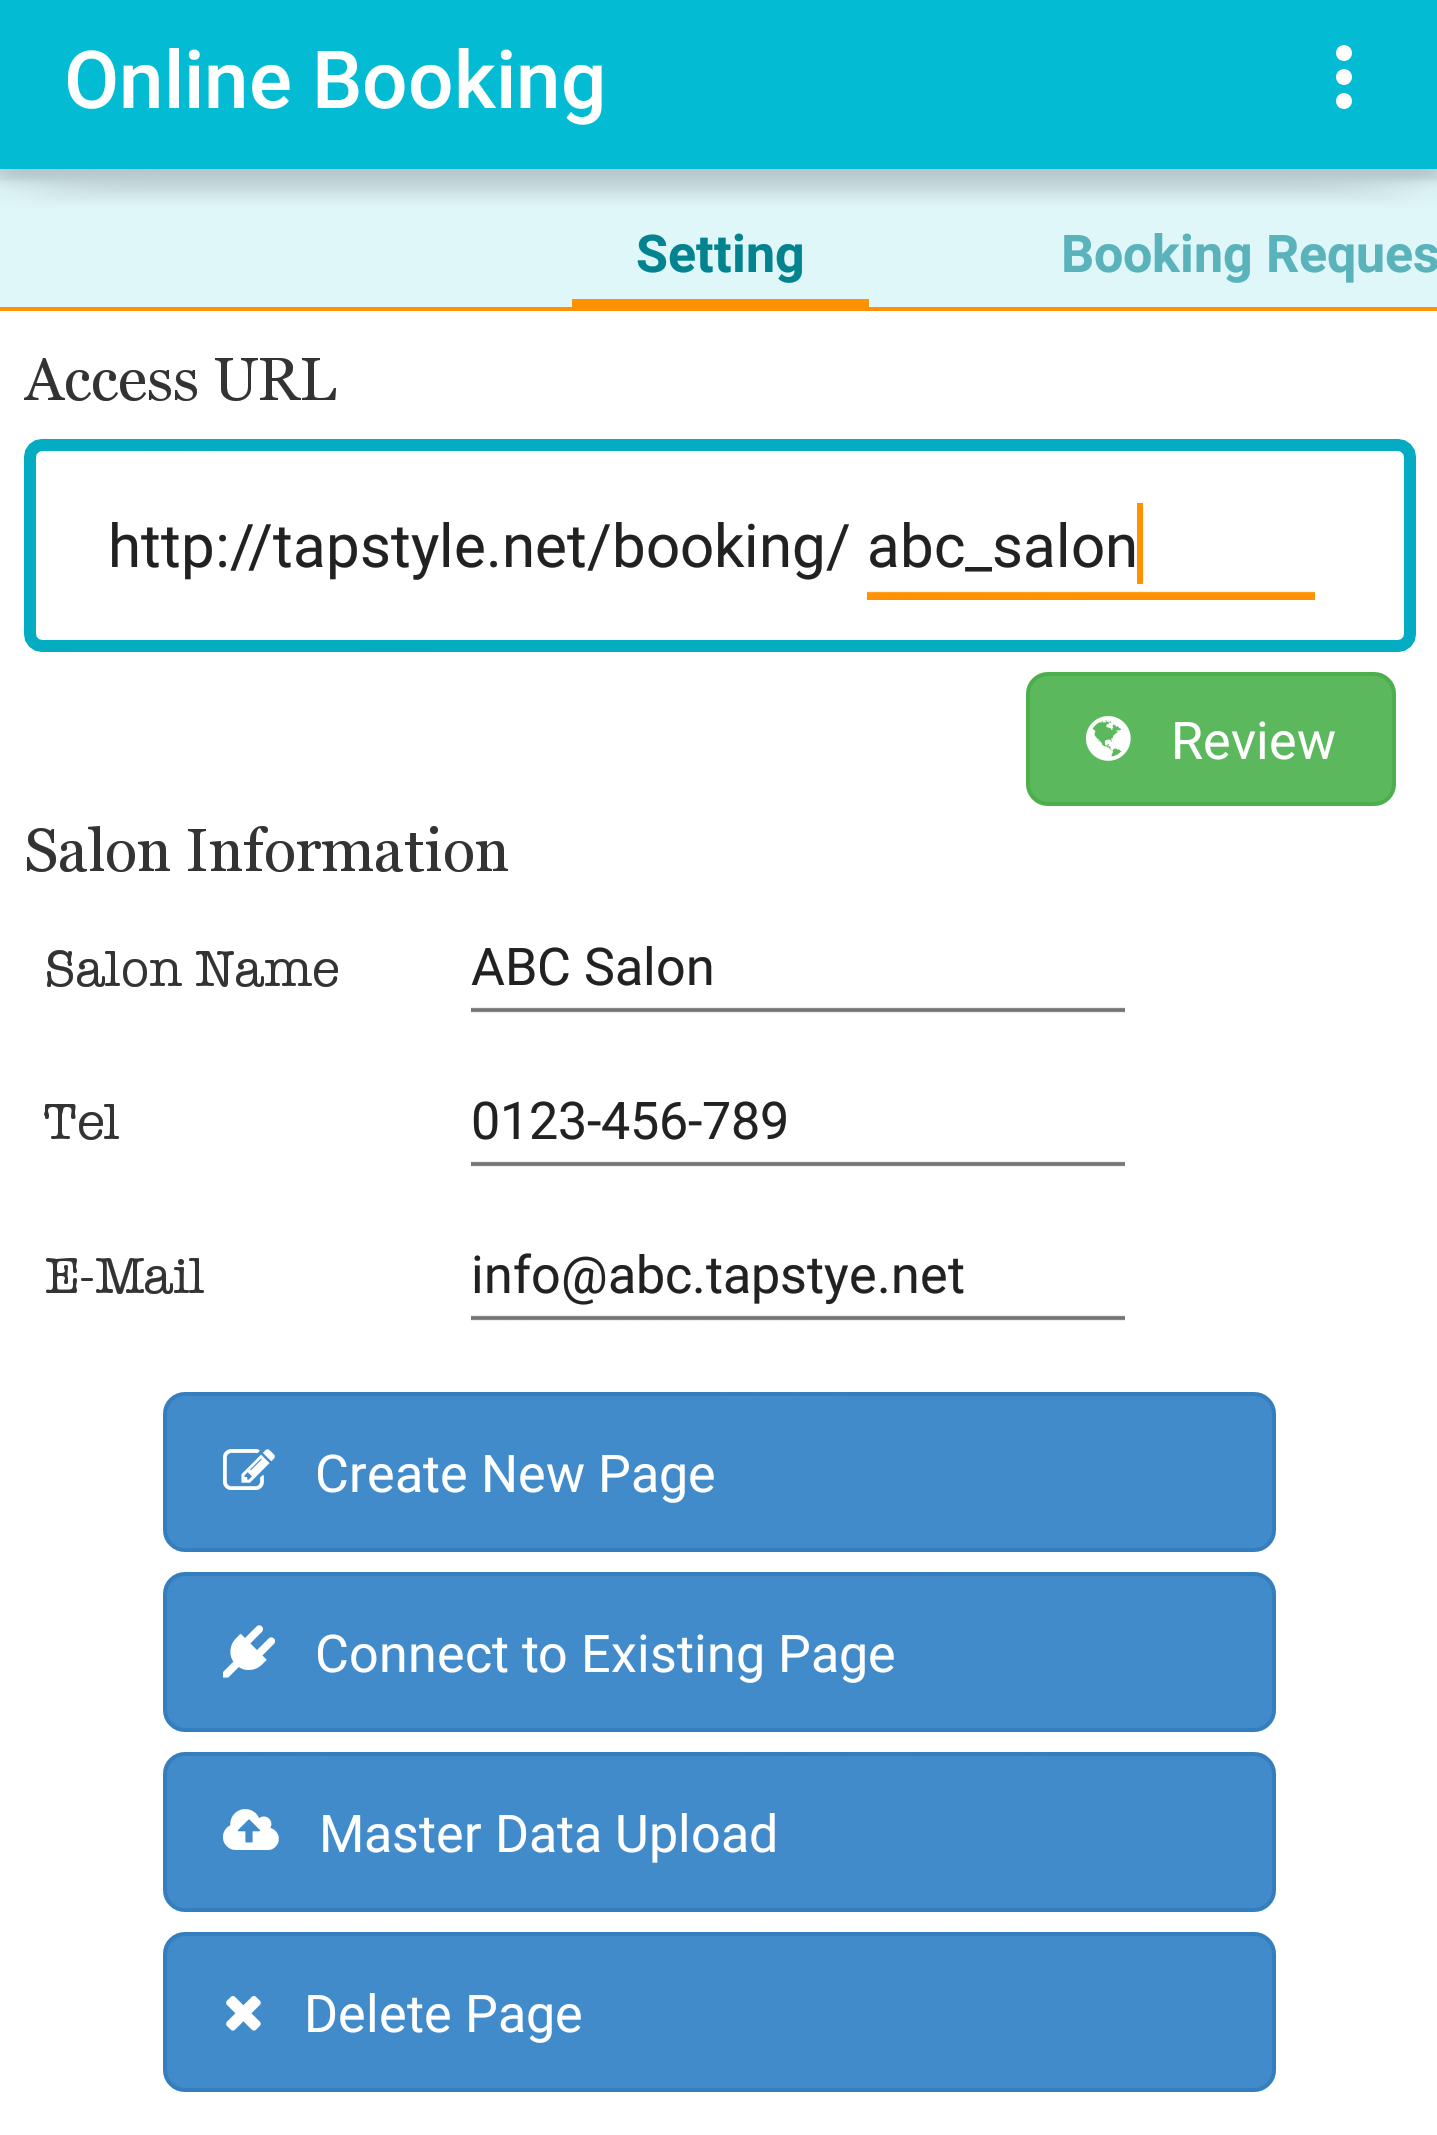 online_booking_setting.png